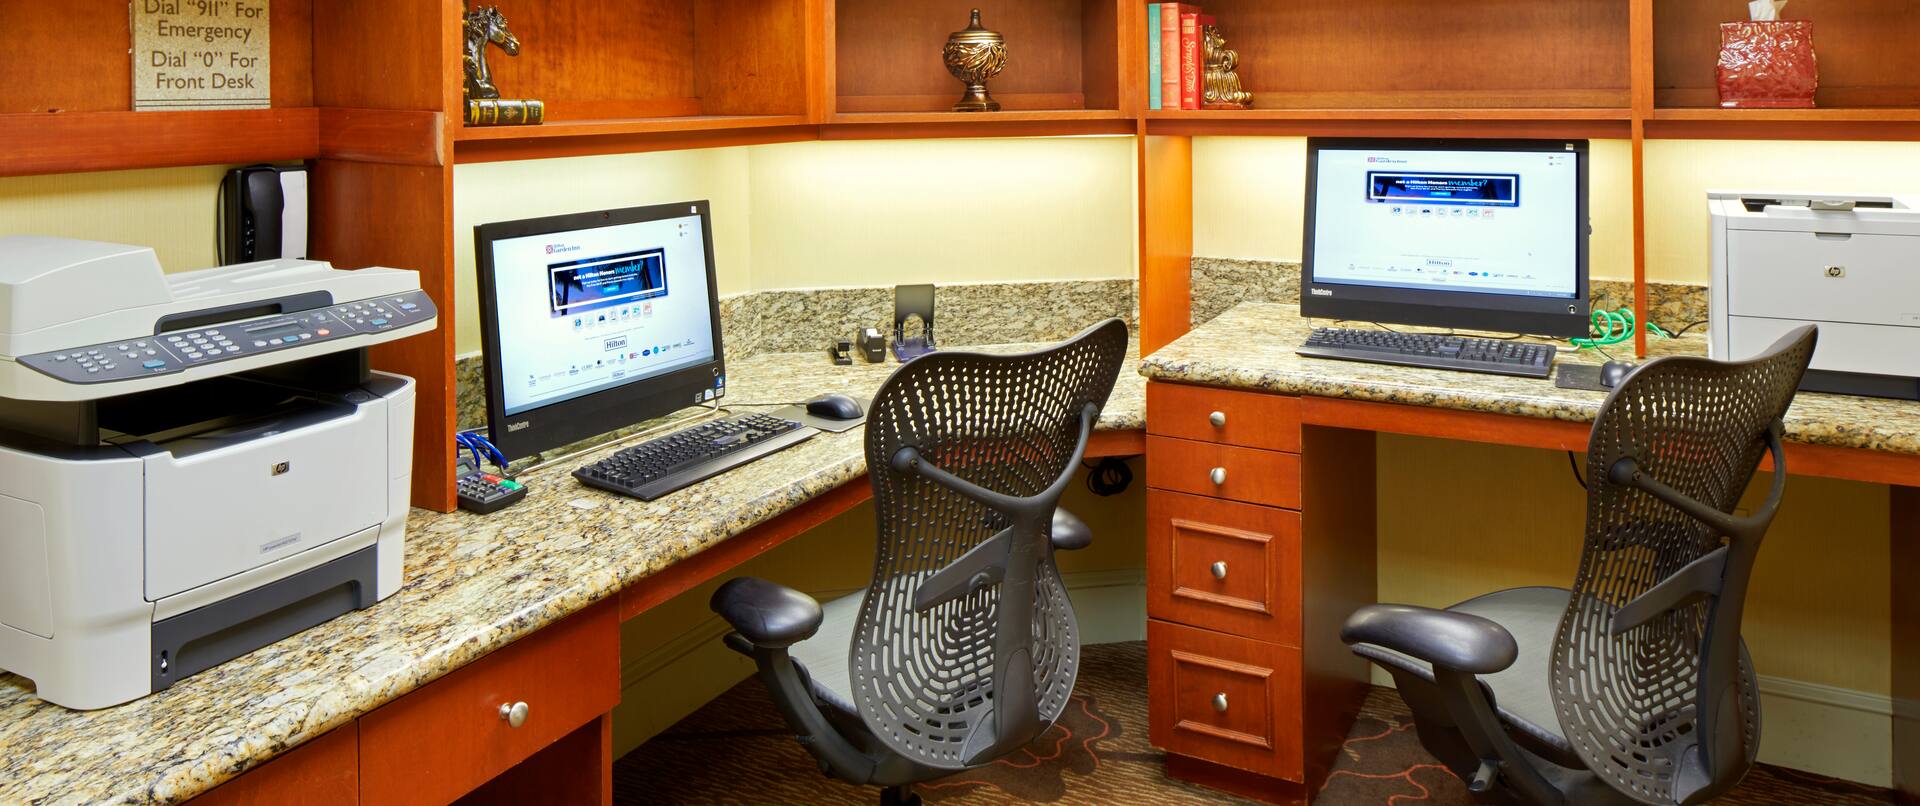 Business Center With Printer, Two Computer, Ergonomic Chairs, and Fax/Copier